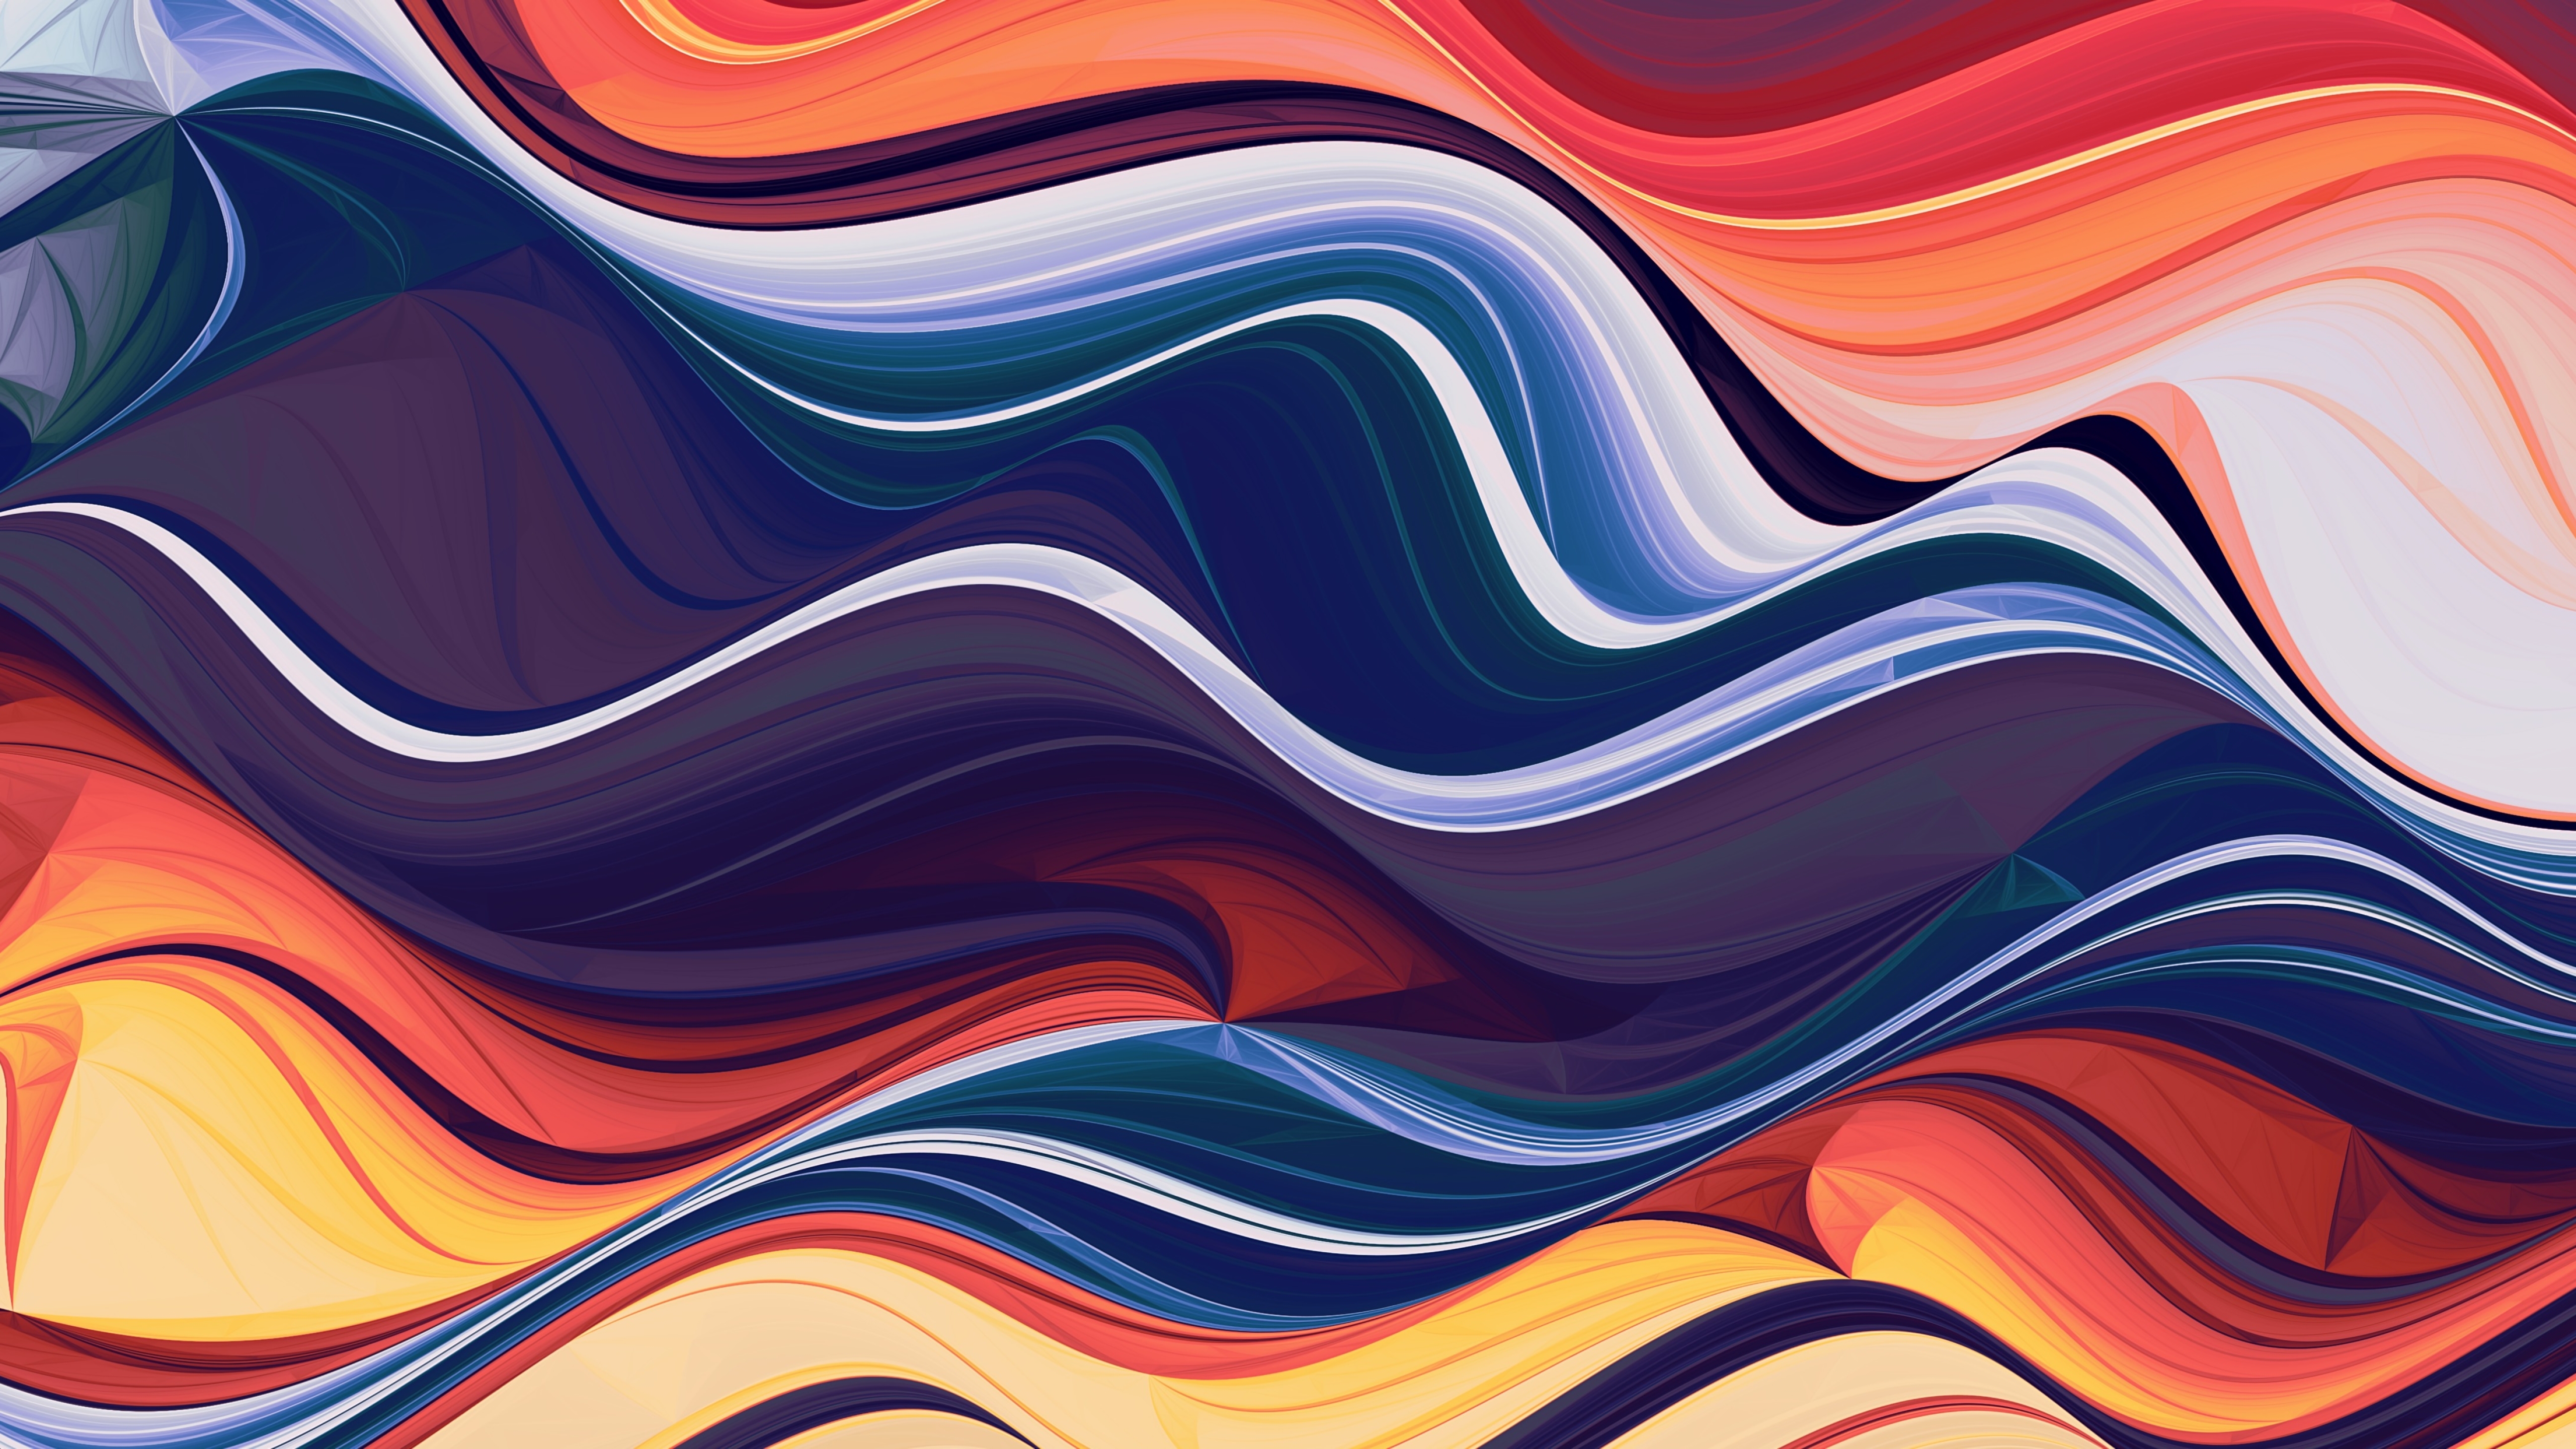 IMac 27 Backgrounds (64+ pictures)